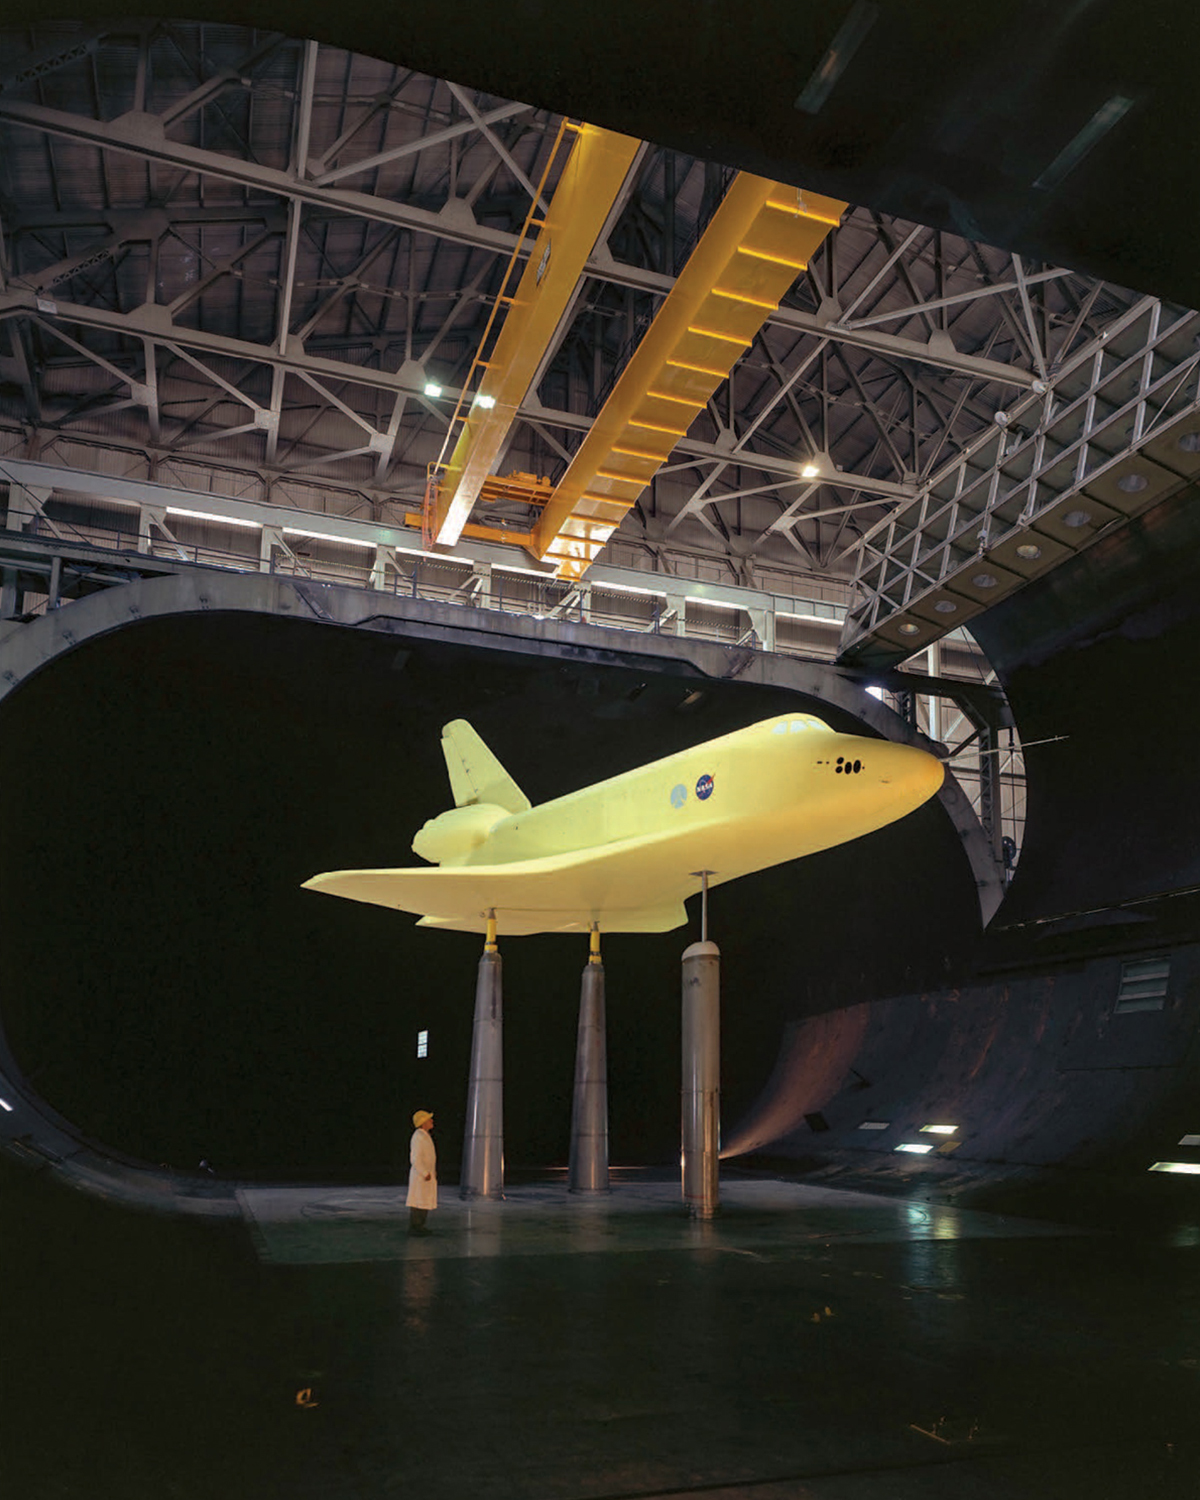 A man wearing a hard hat looks up at a very large scale model of a space shuttle, which is raised above the floor on tall columns inside a wind tunnel.